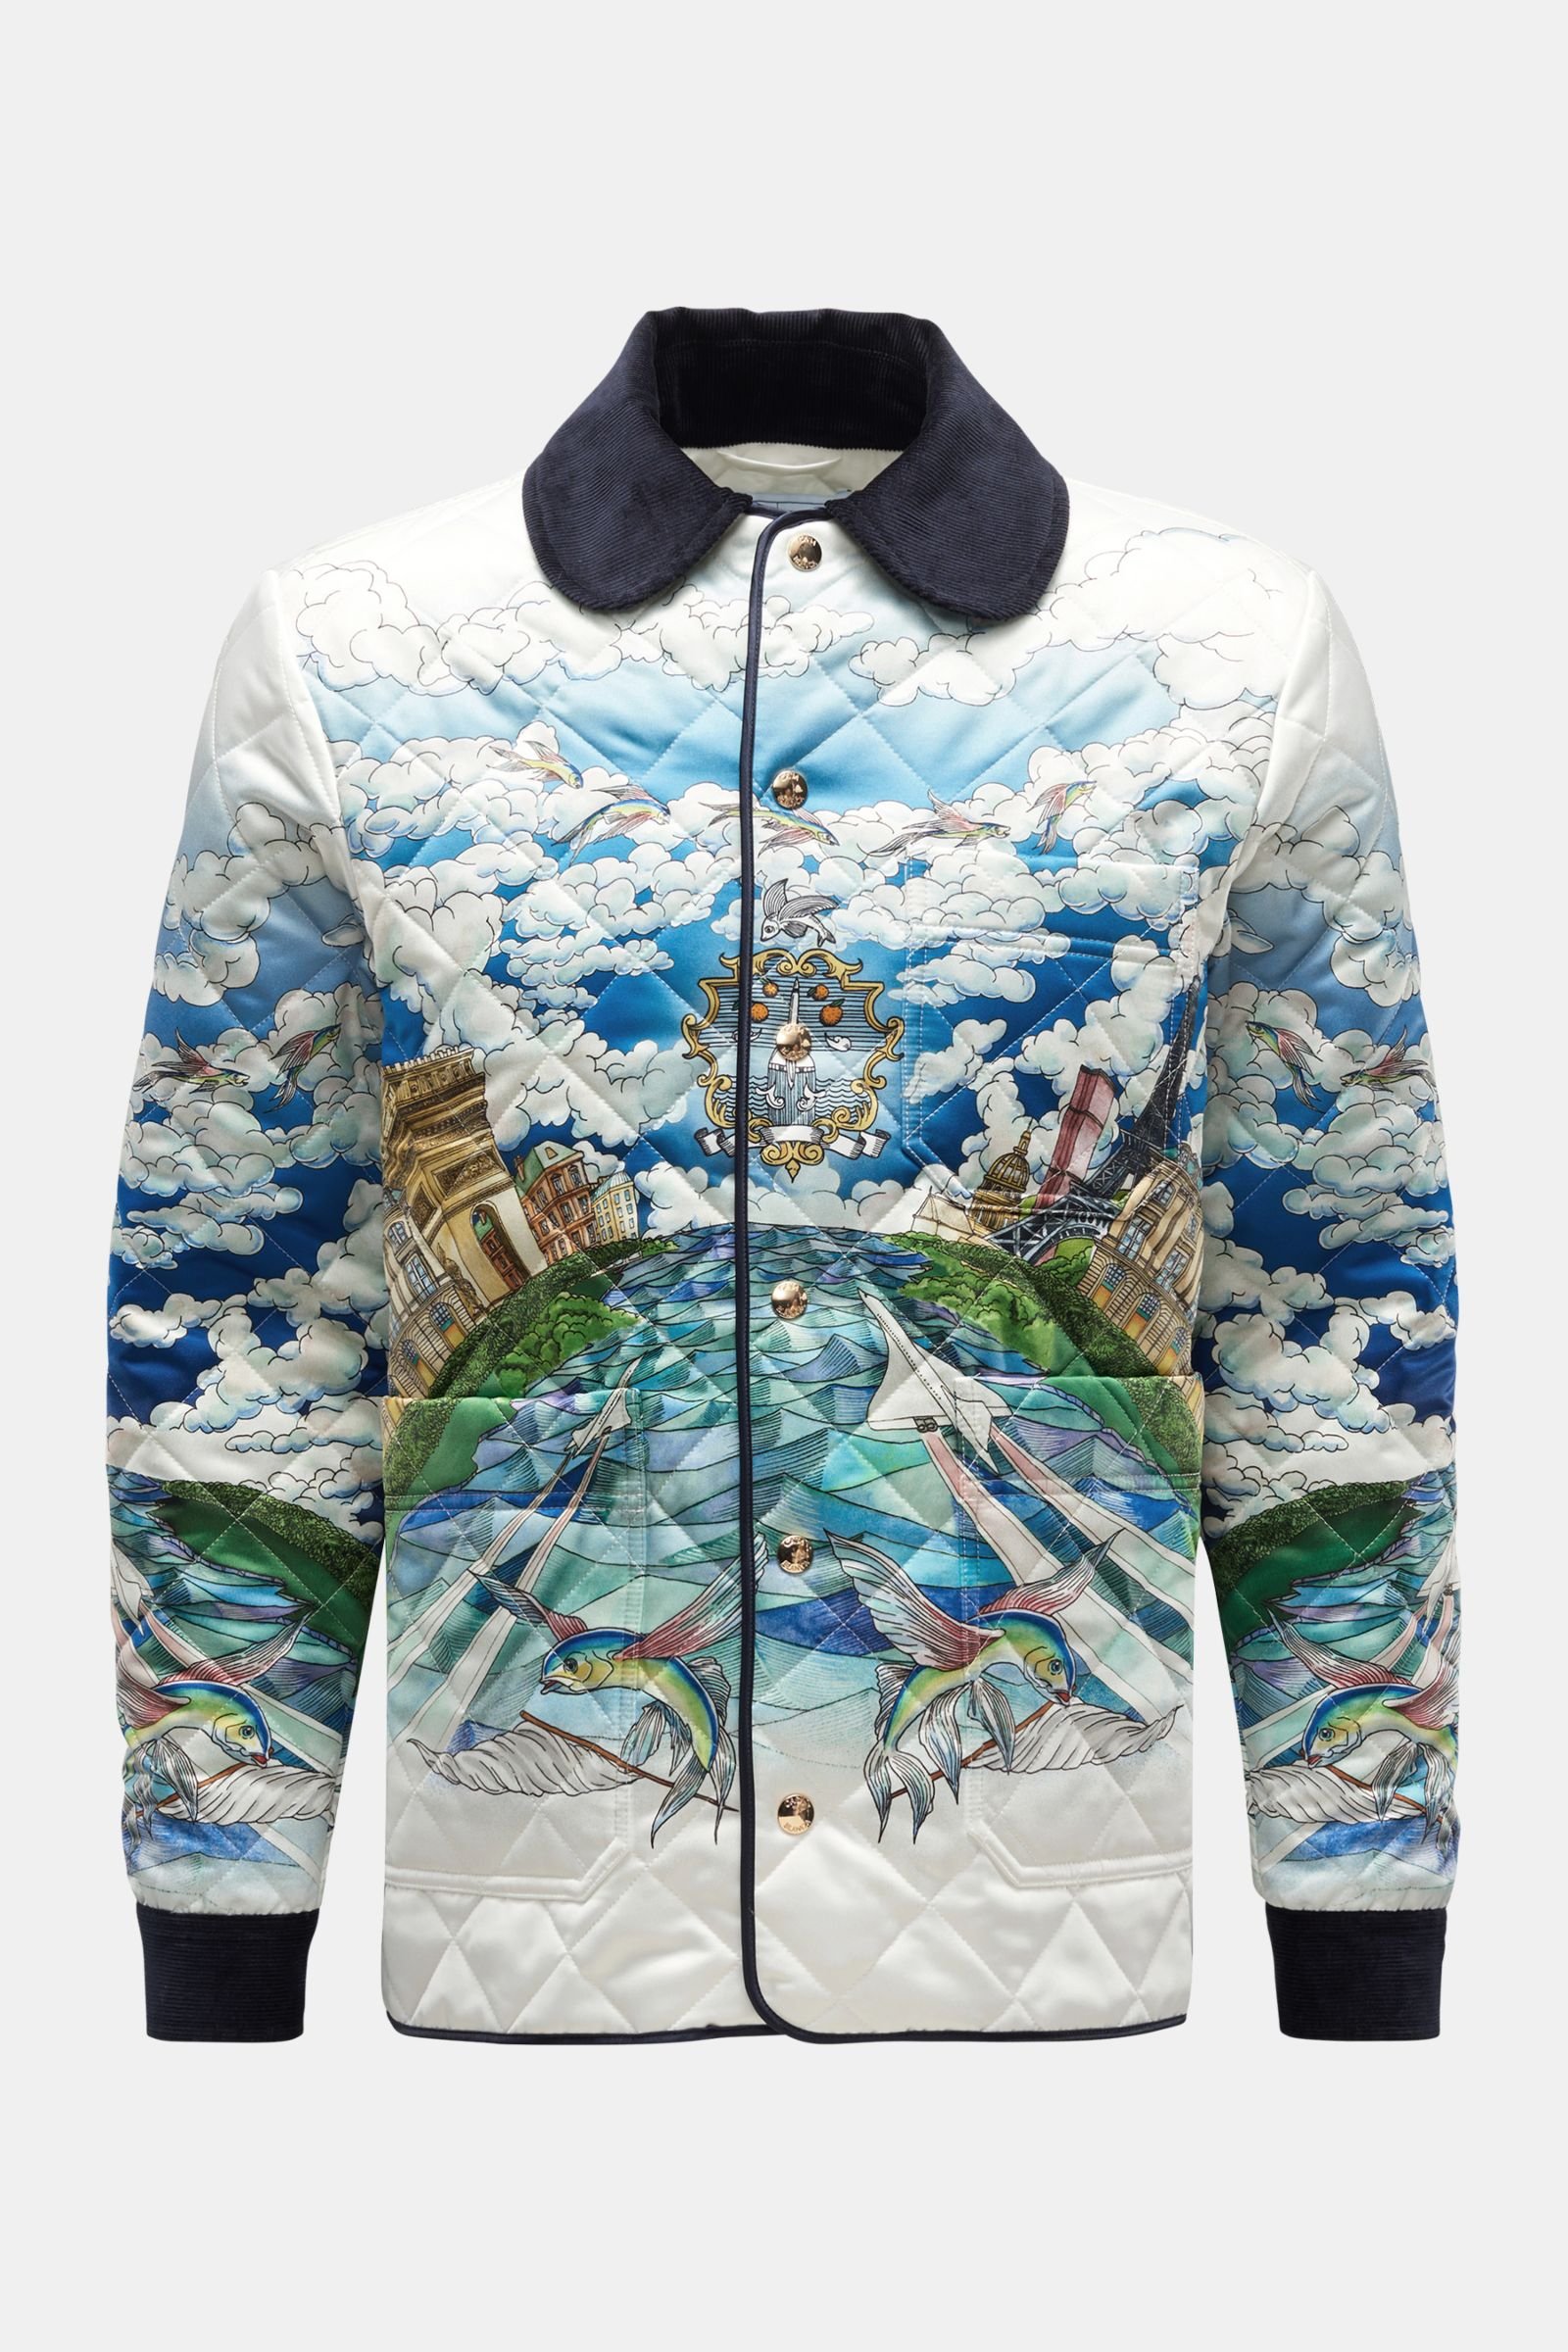 Quilted jacket 'Le Vol Ideal' light blue/green patterned